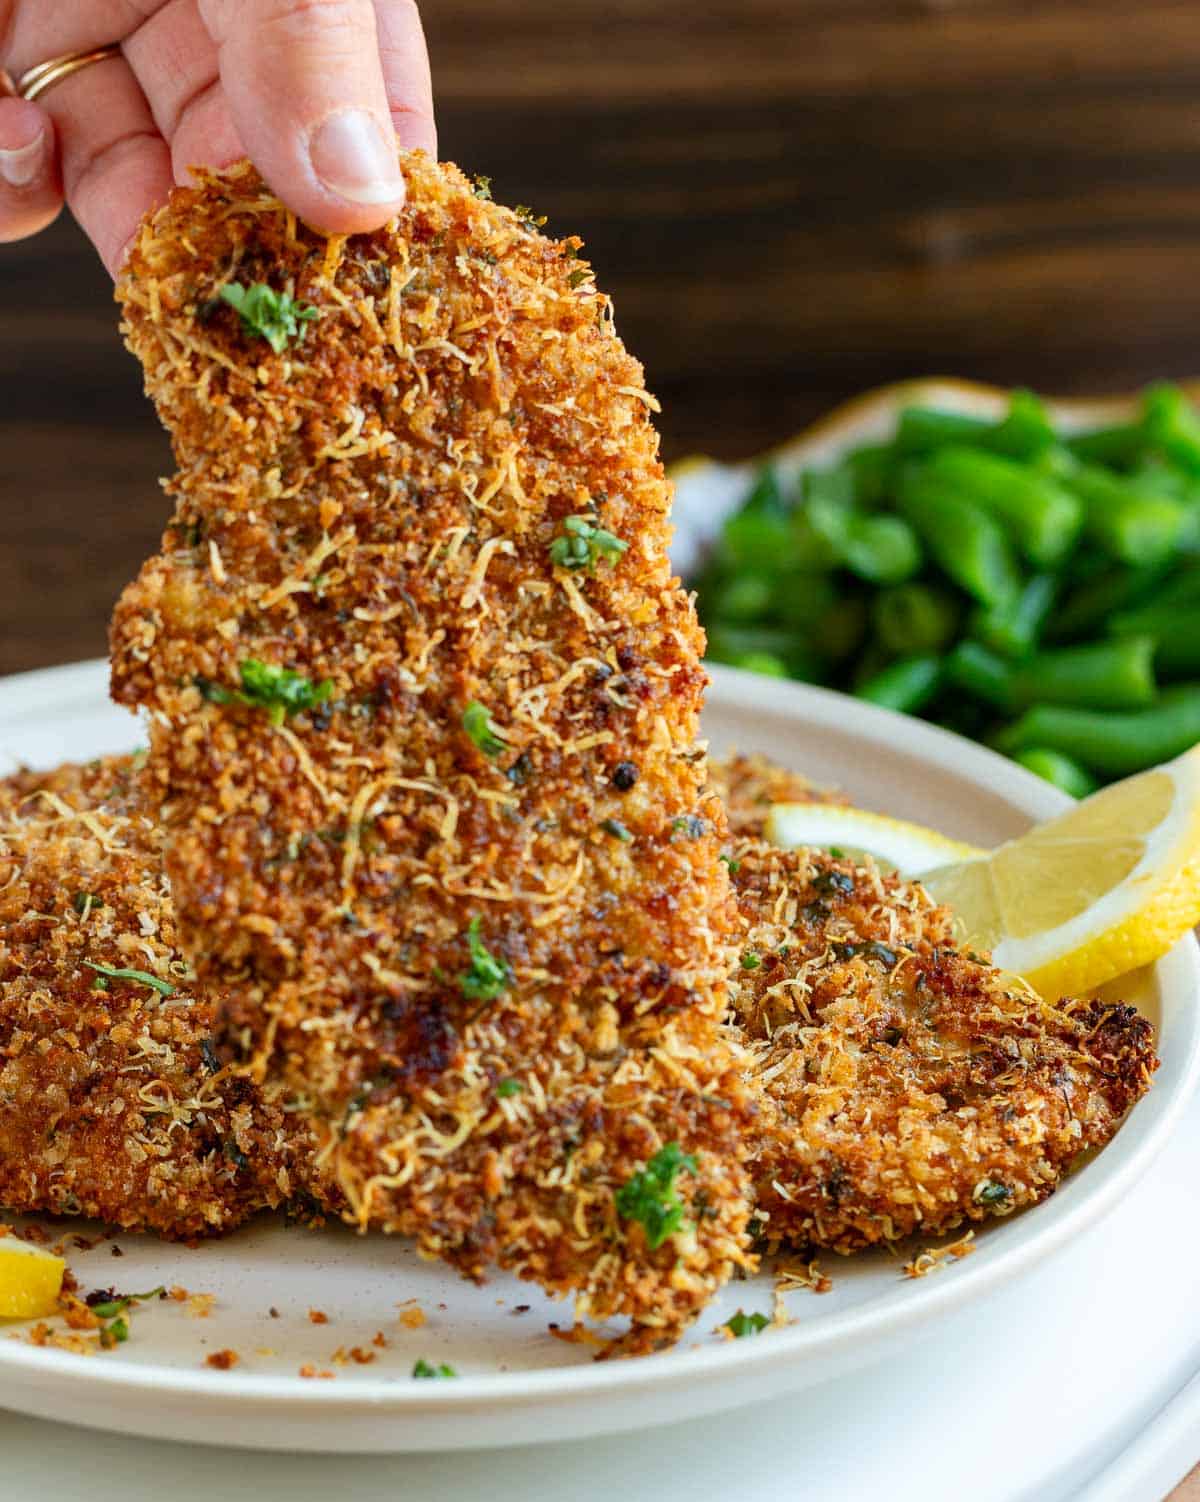 Holding a crispy chicken Milanese in our fingers.